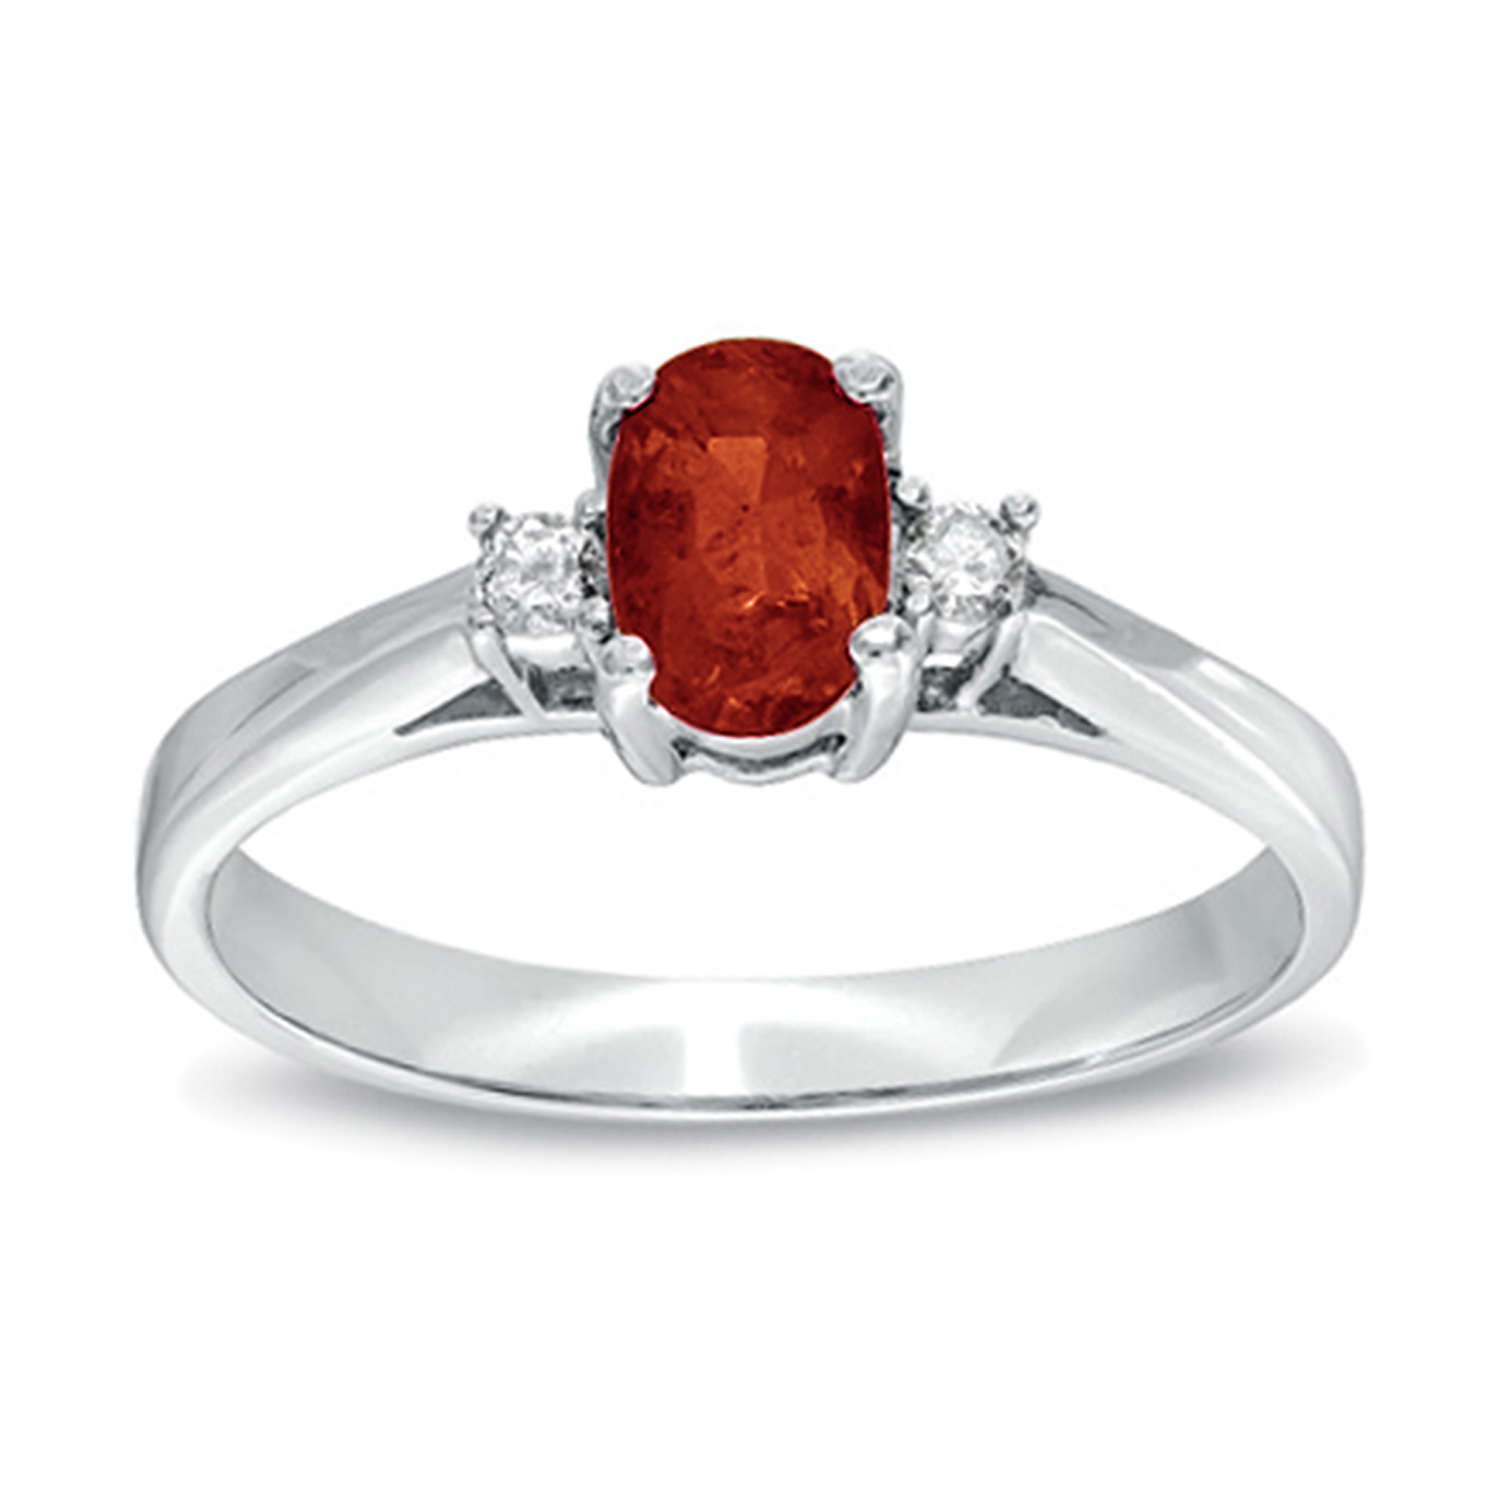 View 0.55cttw Natural Heated Ruby and Diamond Ring set in 14k Gold